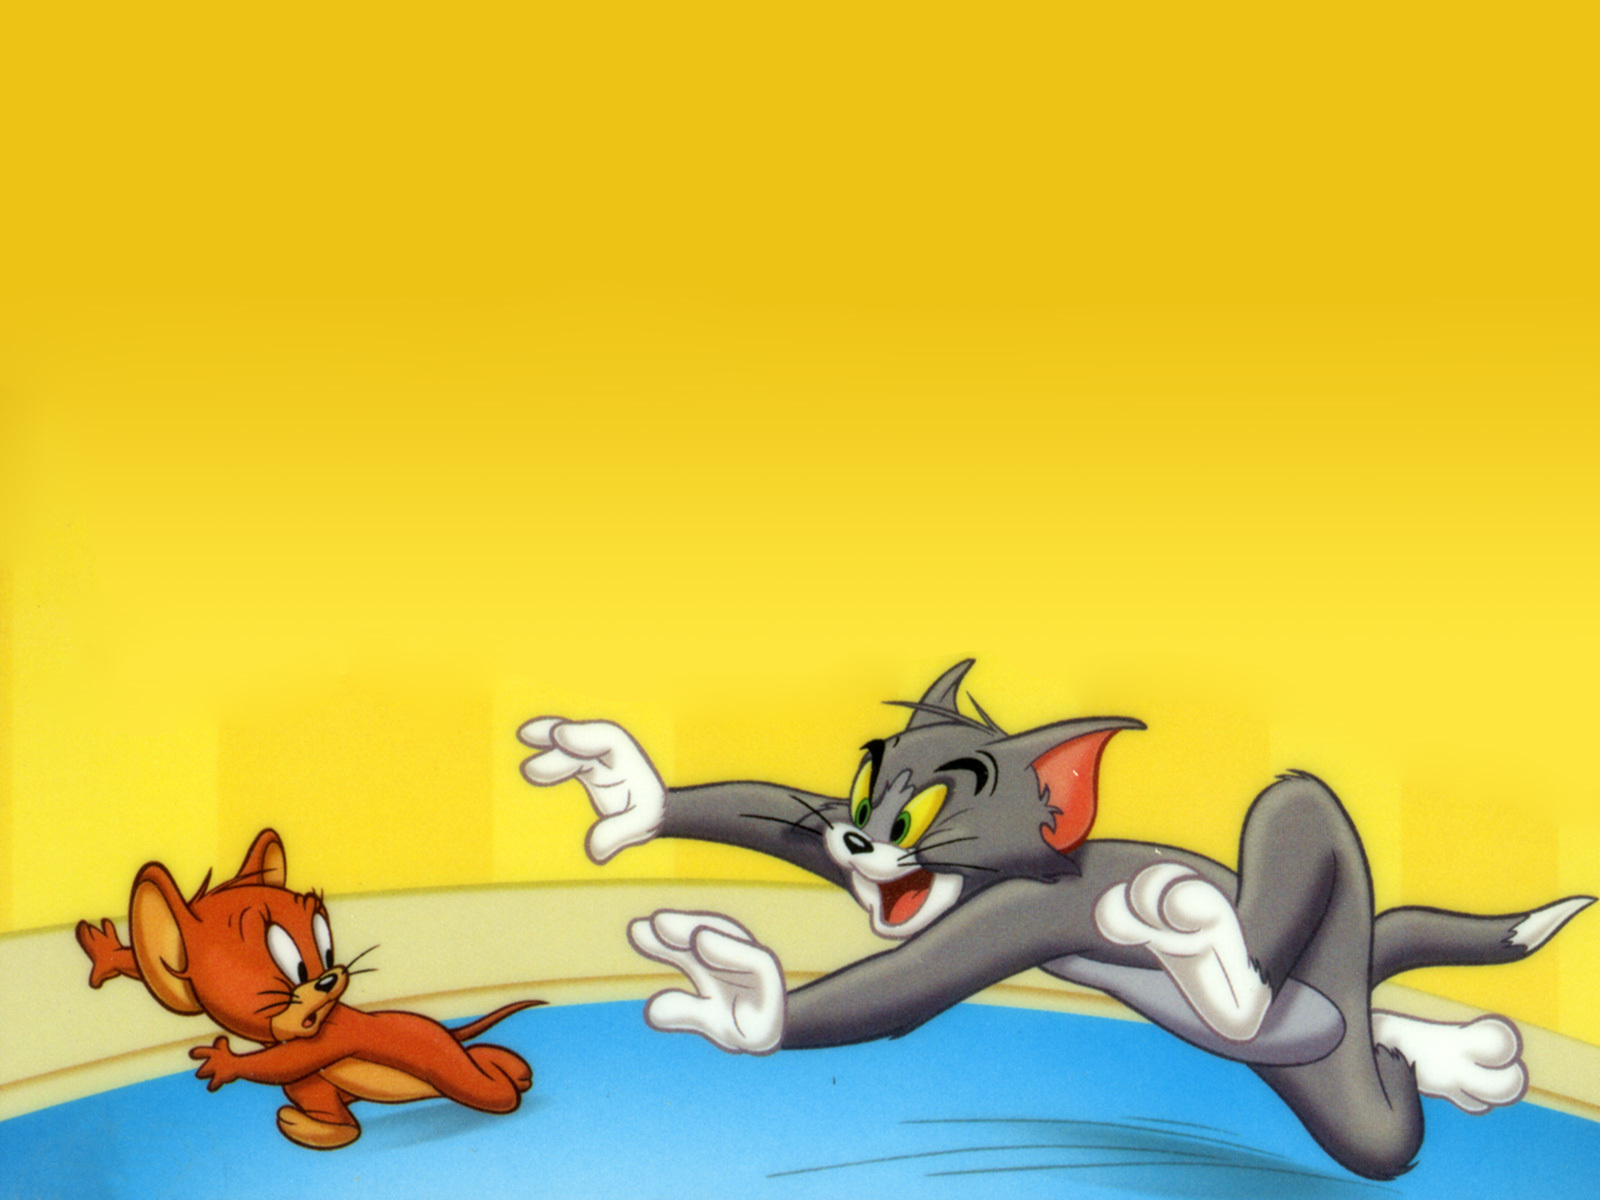 Tom and Jerry Wallpaper